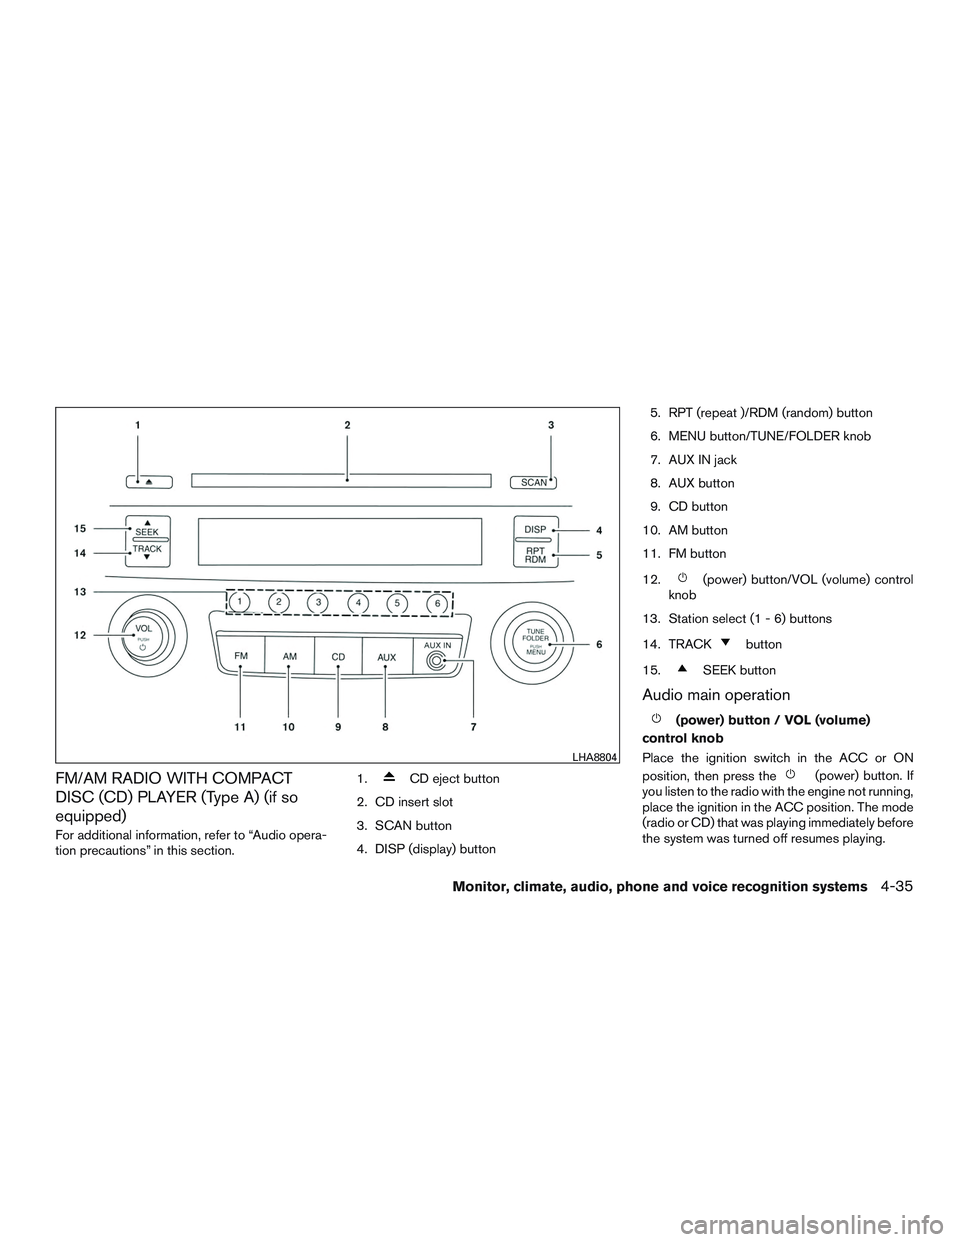 NISSAN ALTIMA SEDAN 2017 User Guide FM/AM RADIO WITH COMPACT
DISC (CD) PLAYER (Type A) (if so
equipped)
For additional information, refer to “Audio opera-
tion precautions” in this section.1.
CD eject button
2. CD insert slot
3. SCA